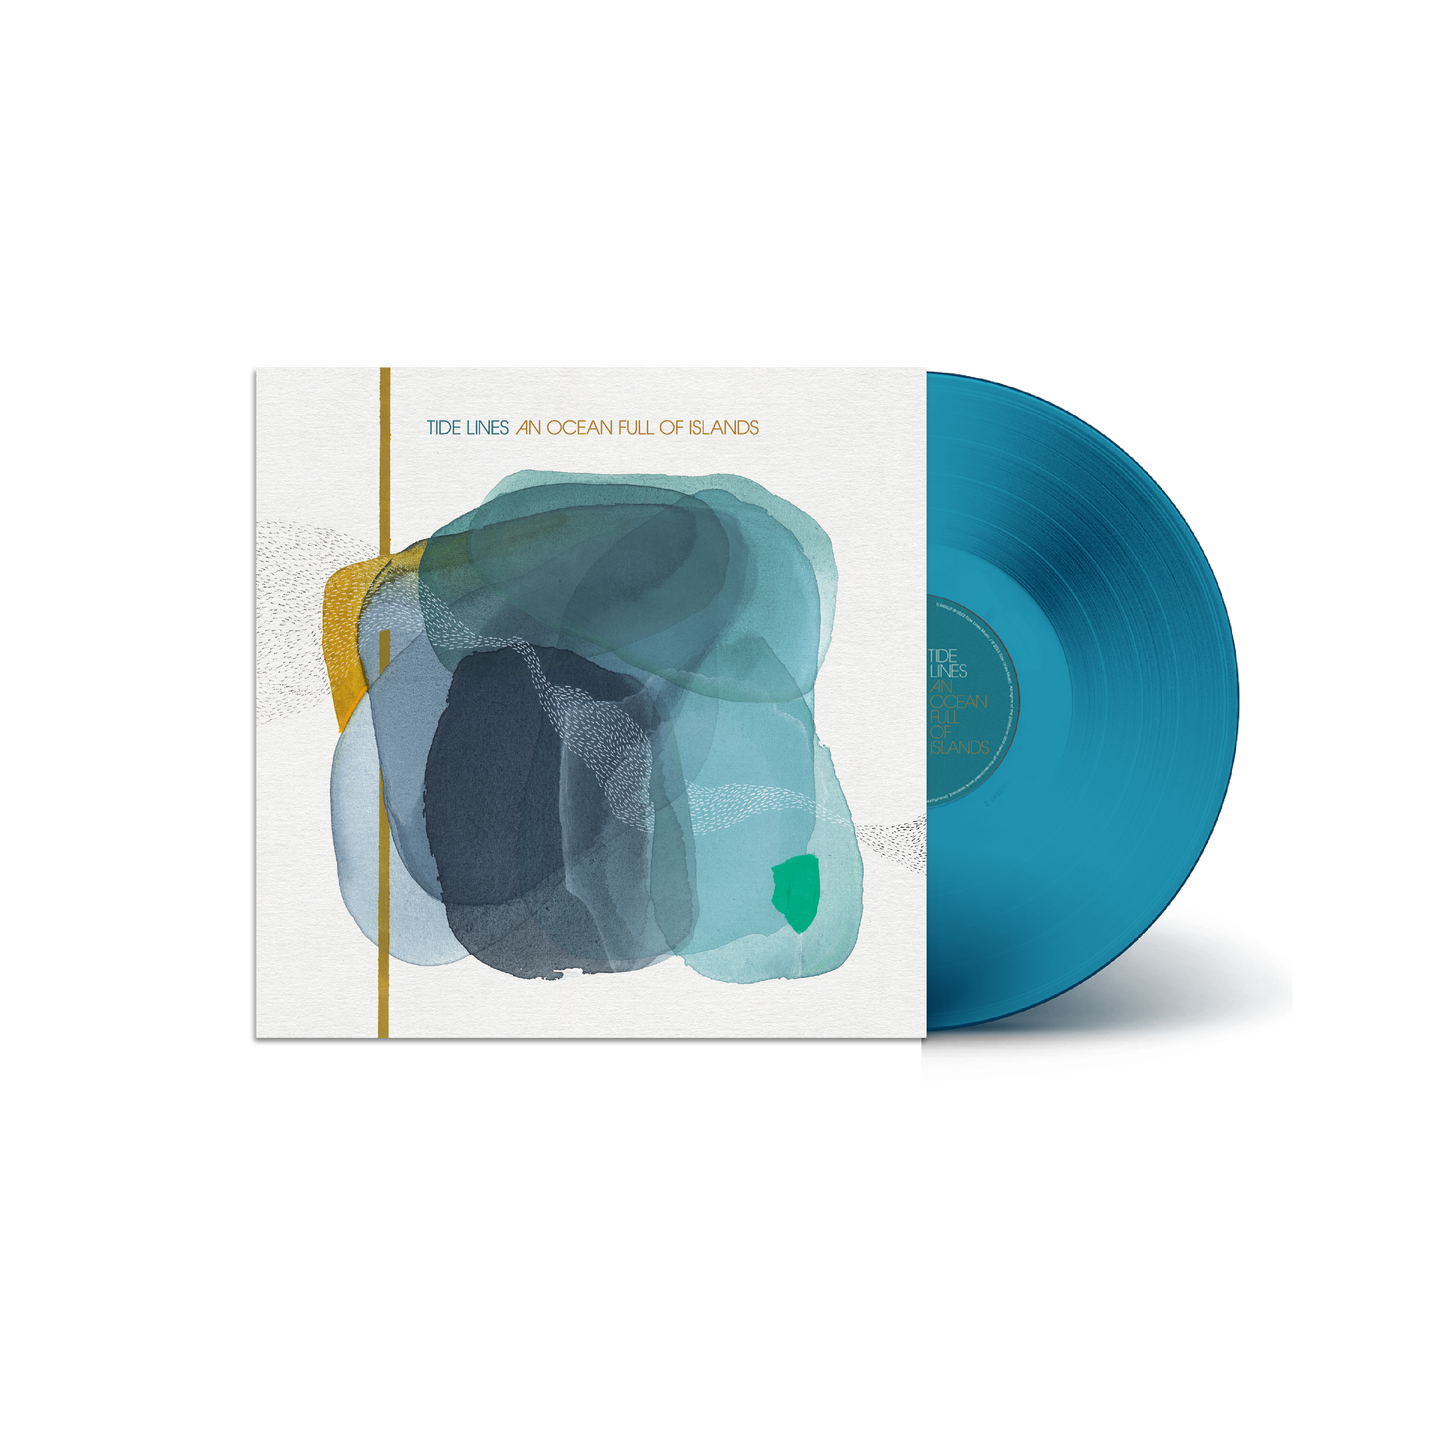 An Ocean Full of Islands - Limited Turquoise Vinyl